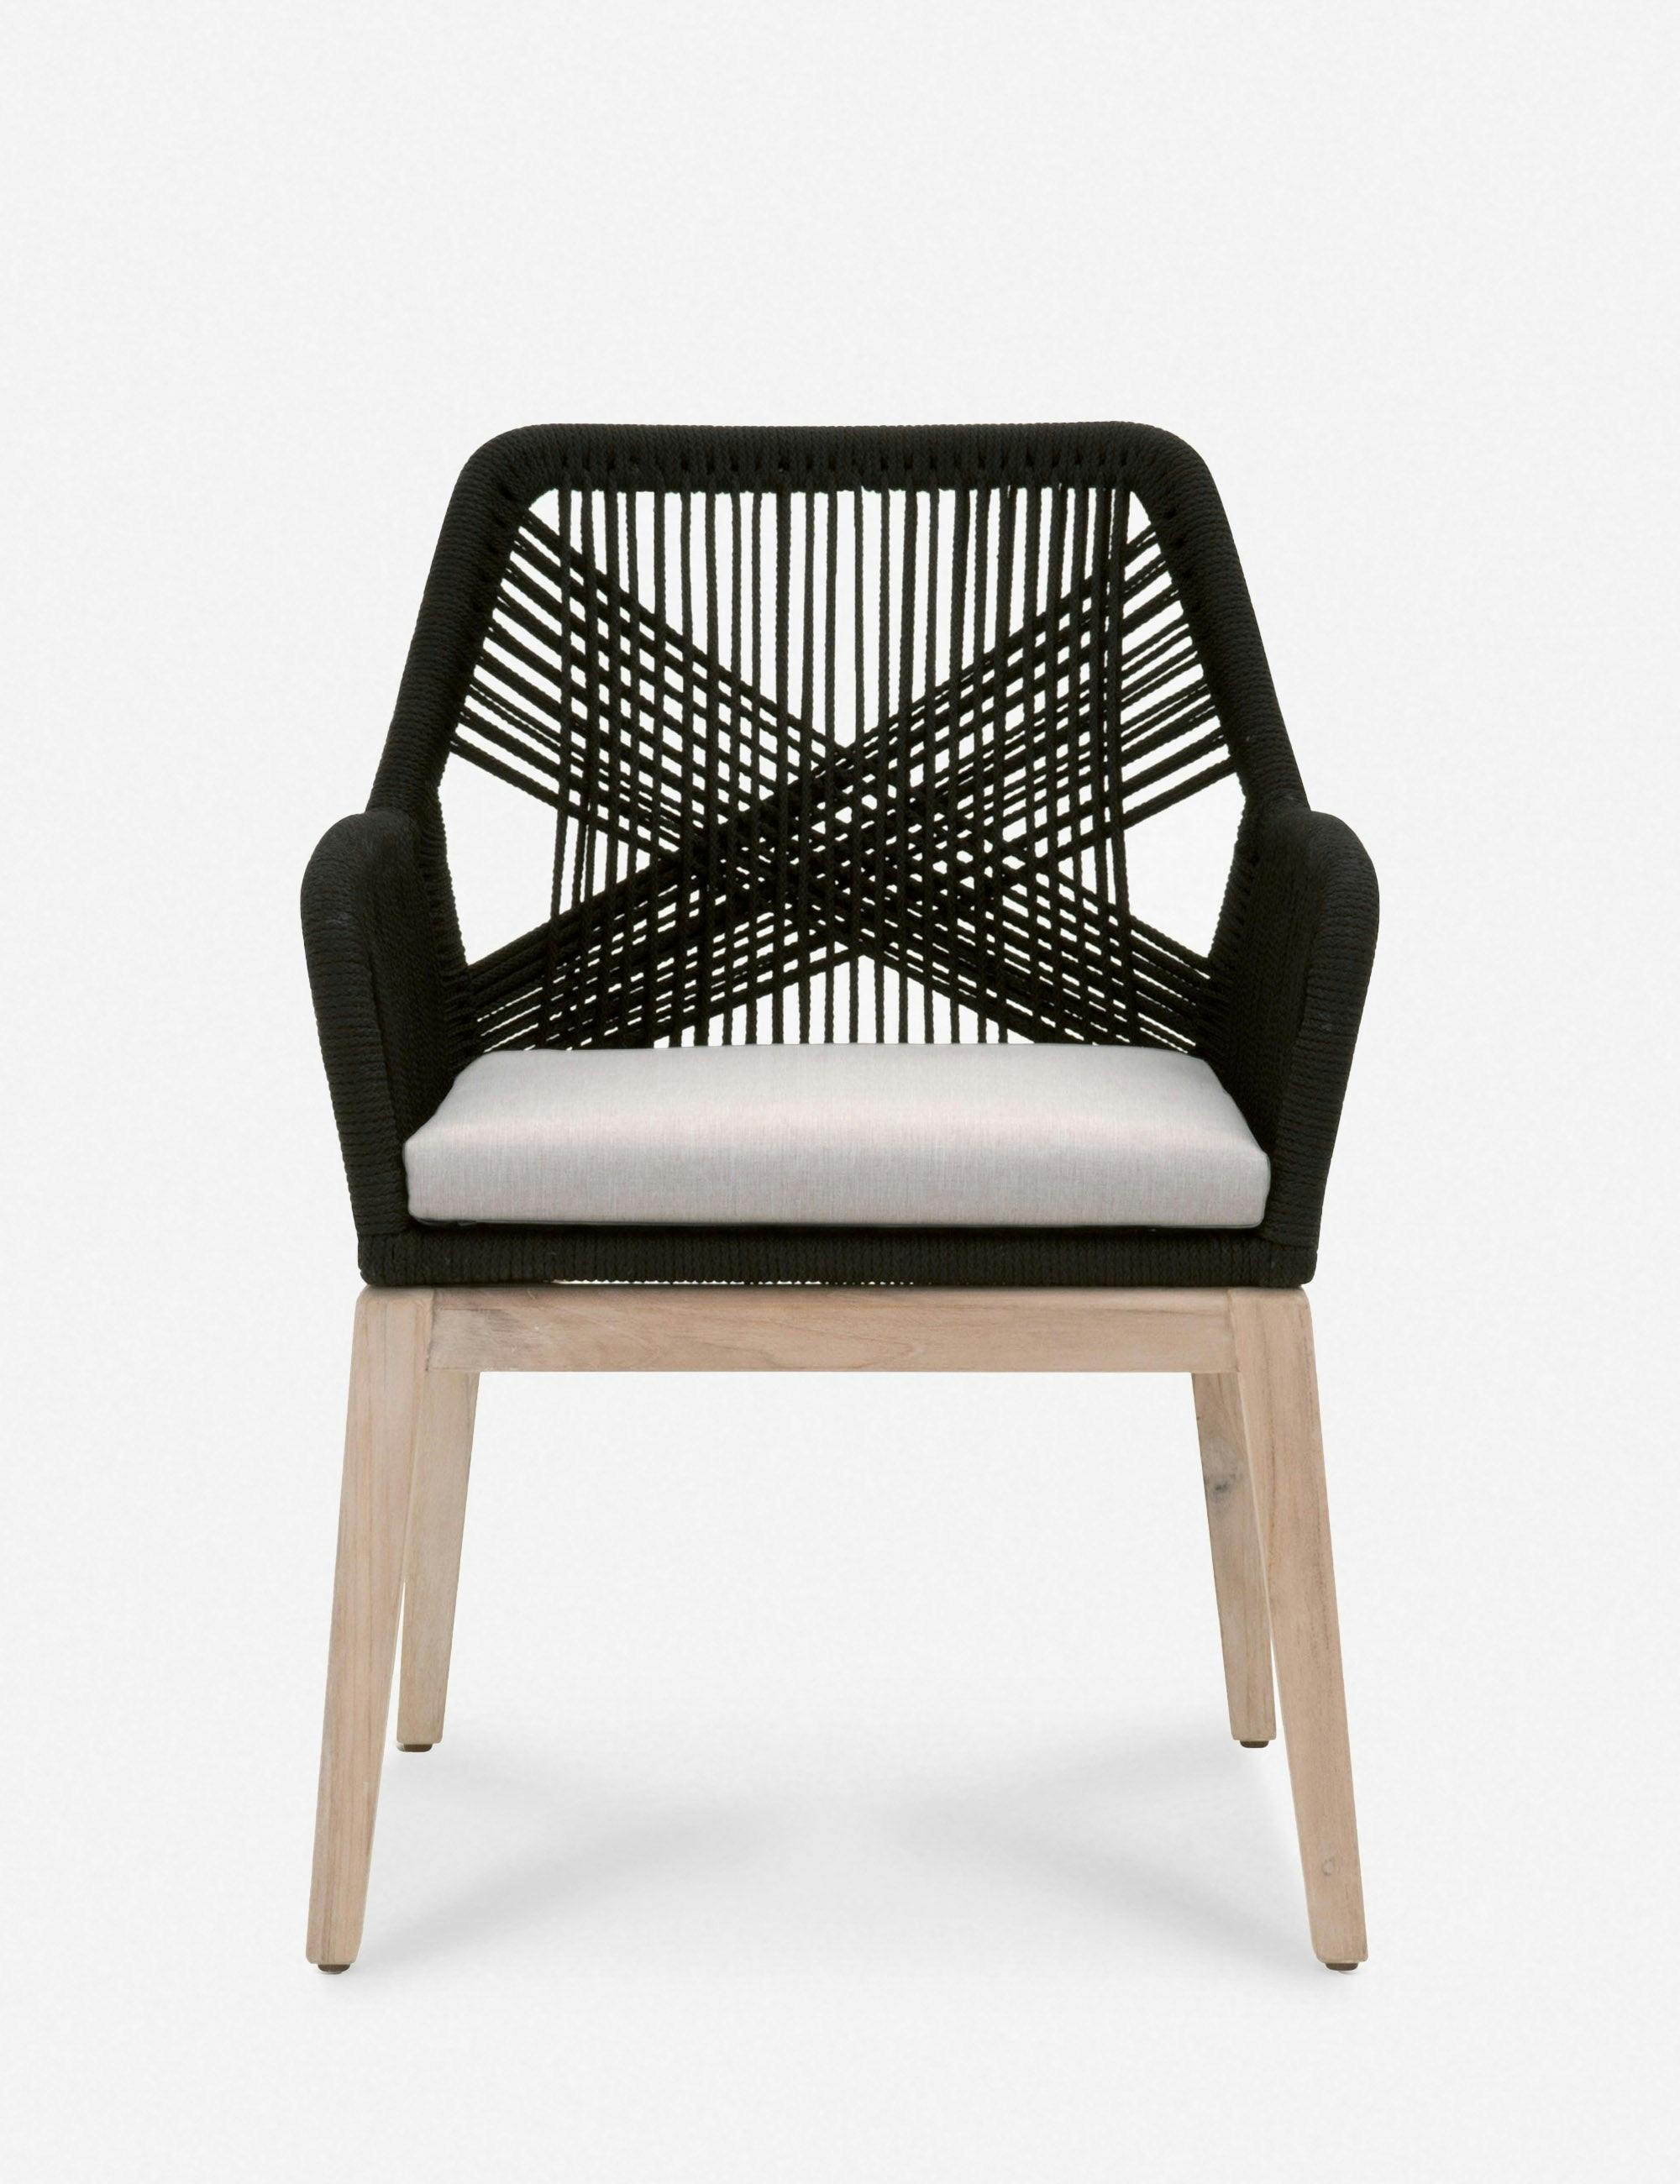 Transitional Woven Black Arm Chair with Removable Cushion